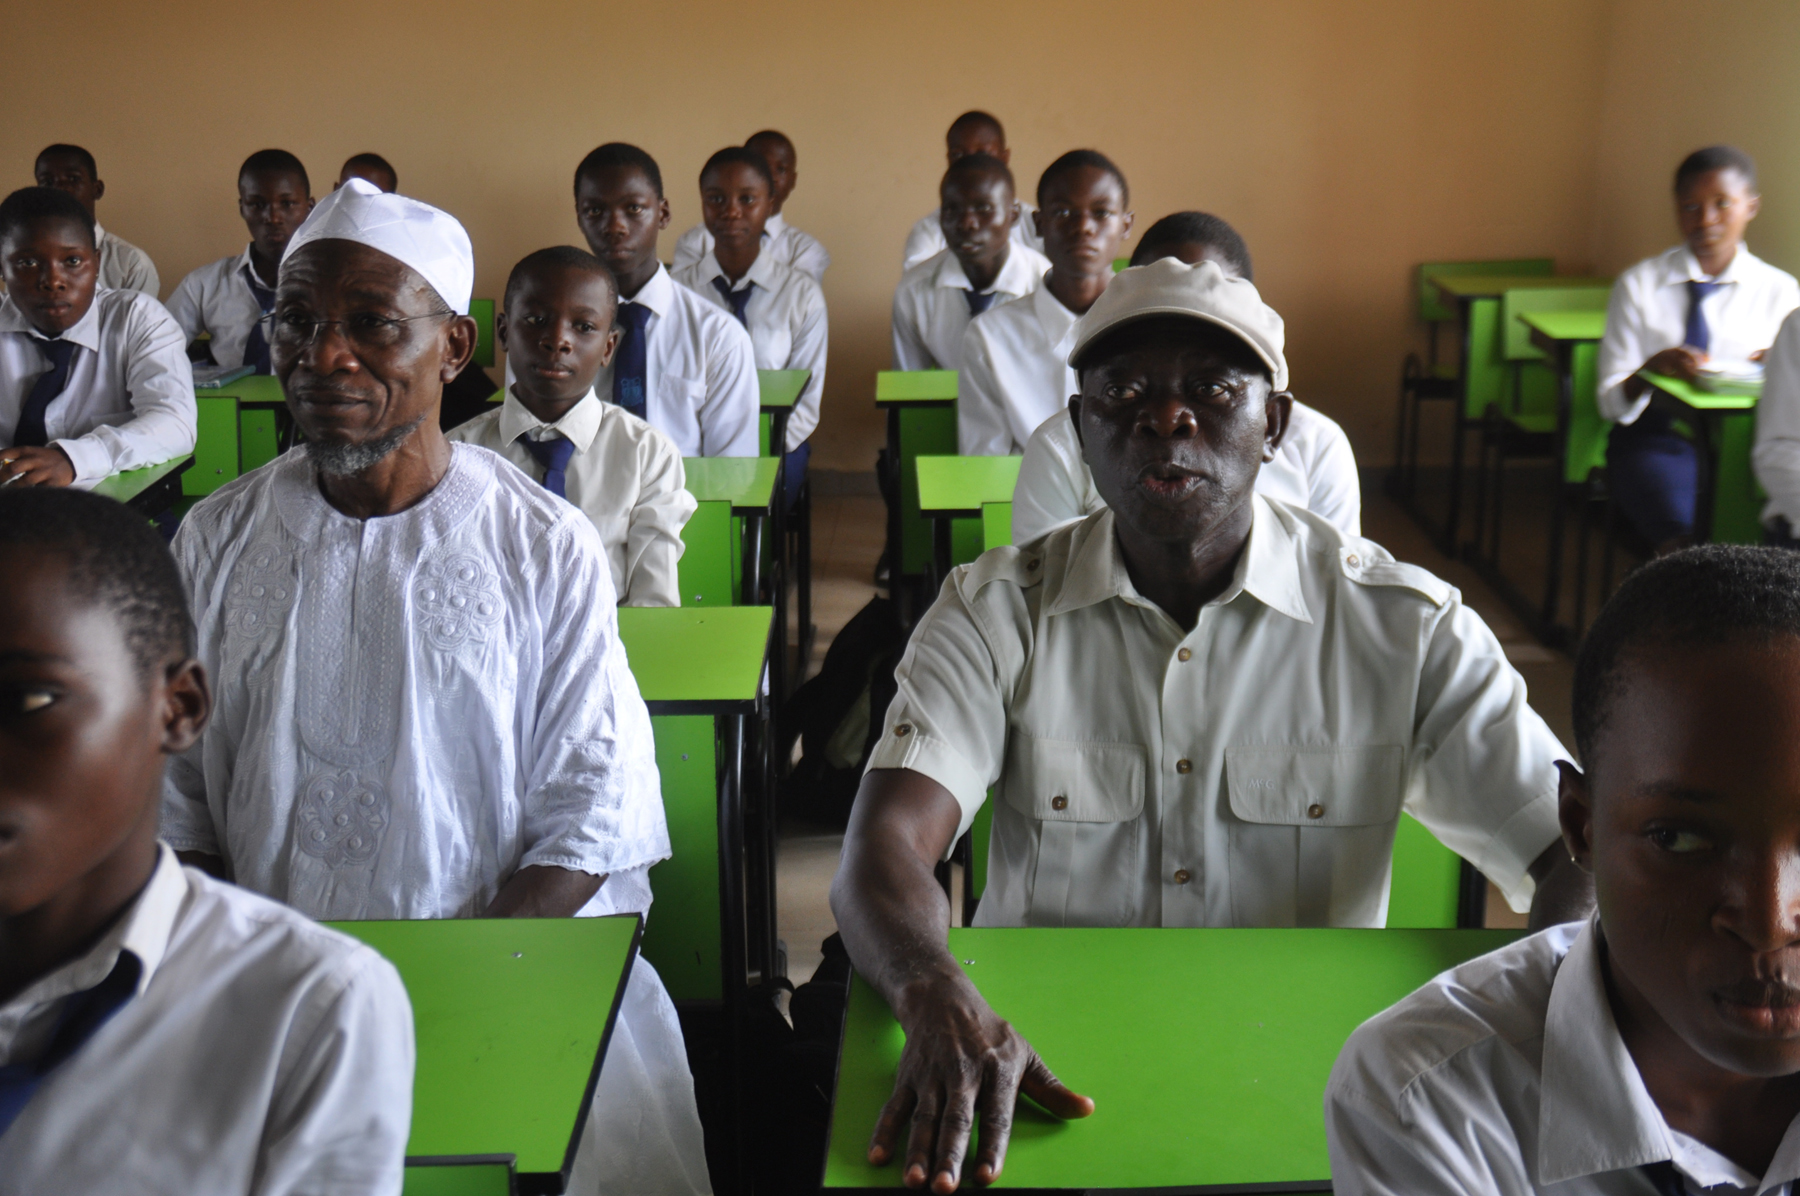 Governor Adams Oshiomhole of Edo State (right) and his Osun State counterpart, Ogbeni Rauf Aregbesola sit with students in one of the classrooms of the rebuilt Asoro Grammar School, Benin City, after the commissioning of the school on Friday.